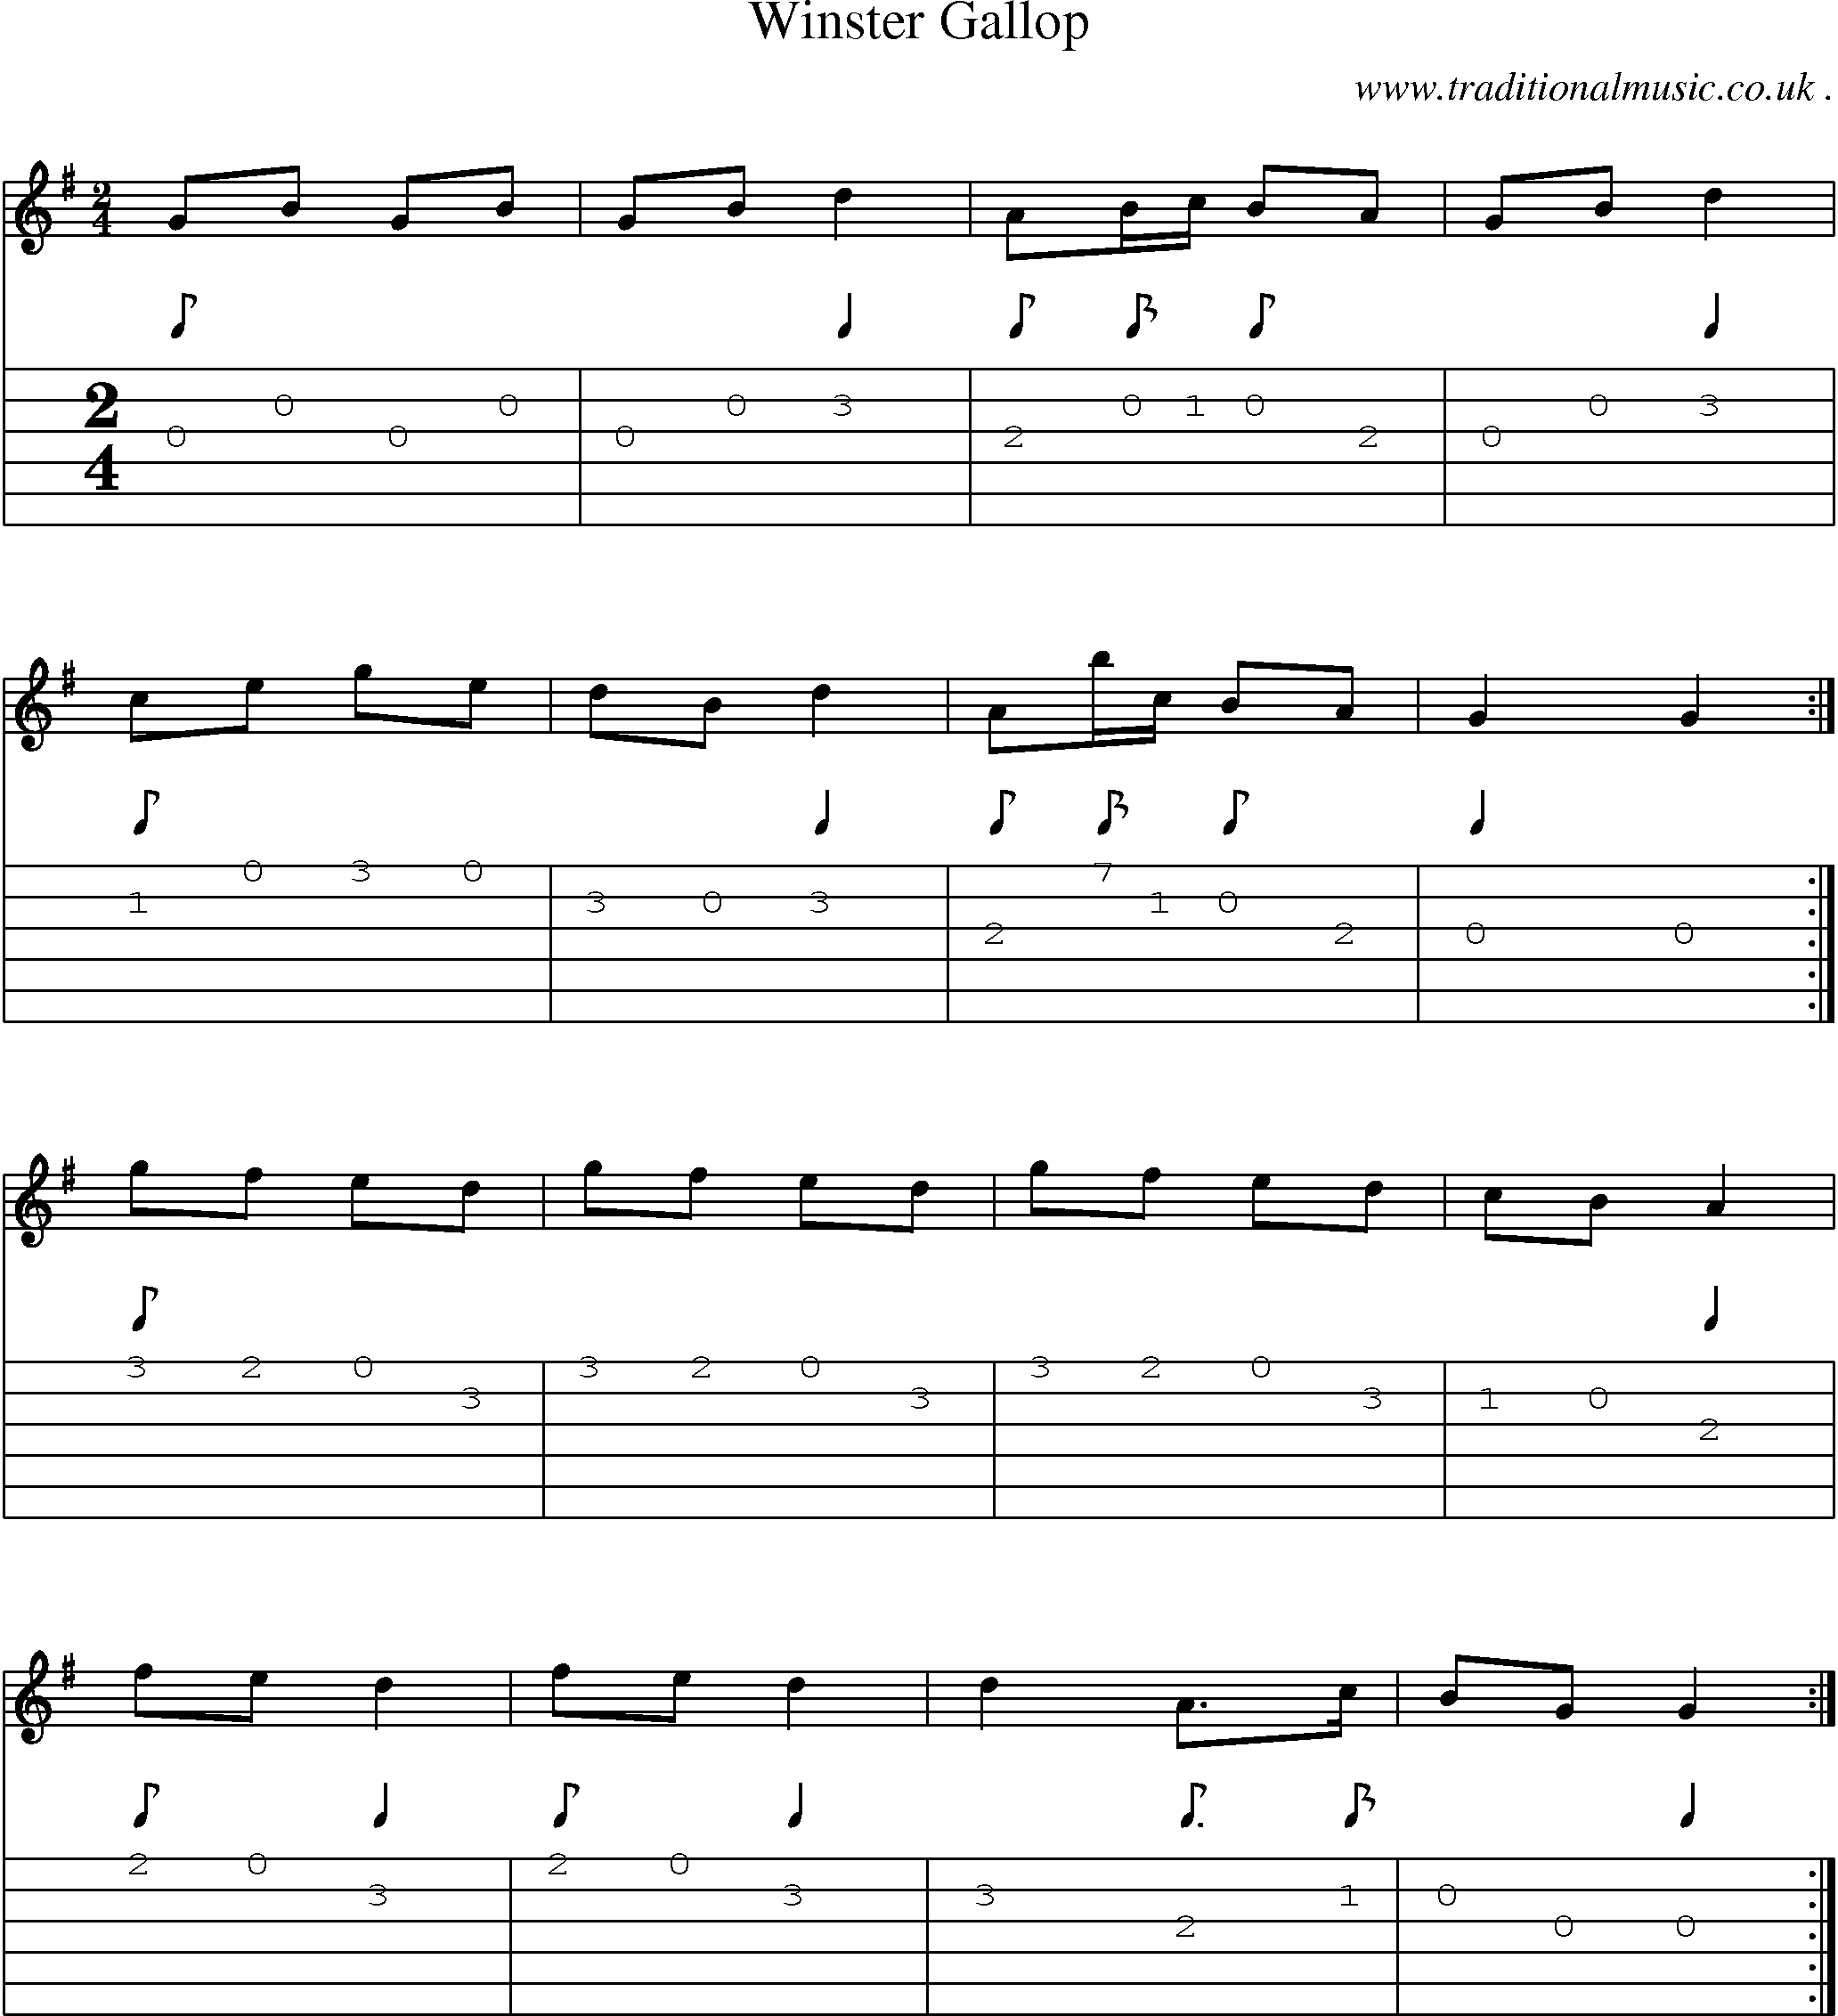 Sheet-music  score, Chords and Guitar Tabs for Winster Gallop